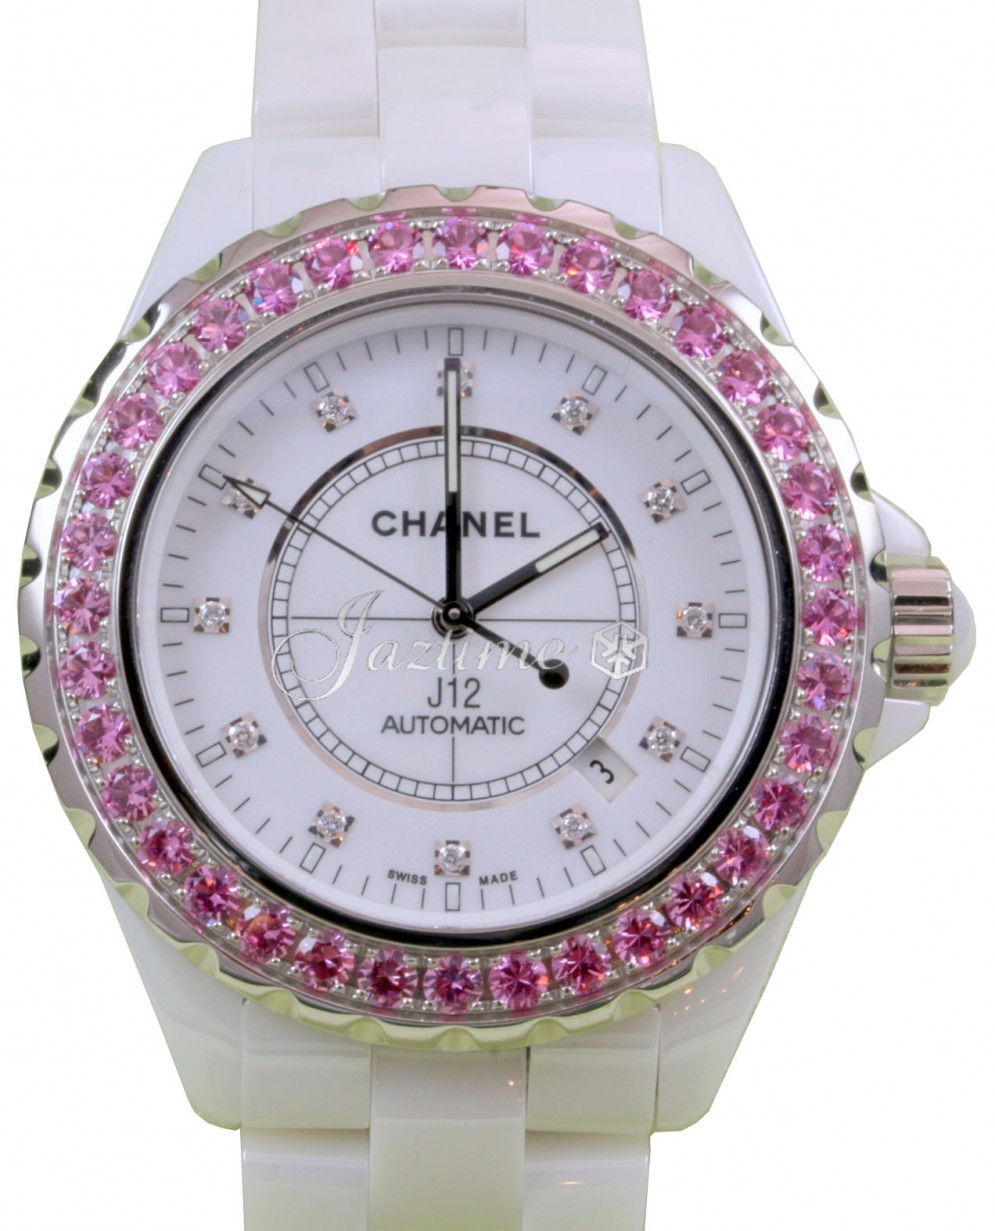 Chanel J12 Automatic White Ceramic Watch - 4 For Sale on 1stDibs